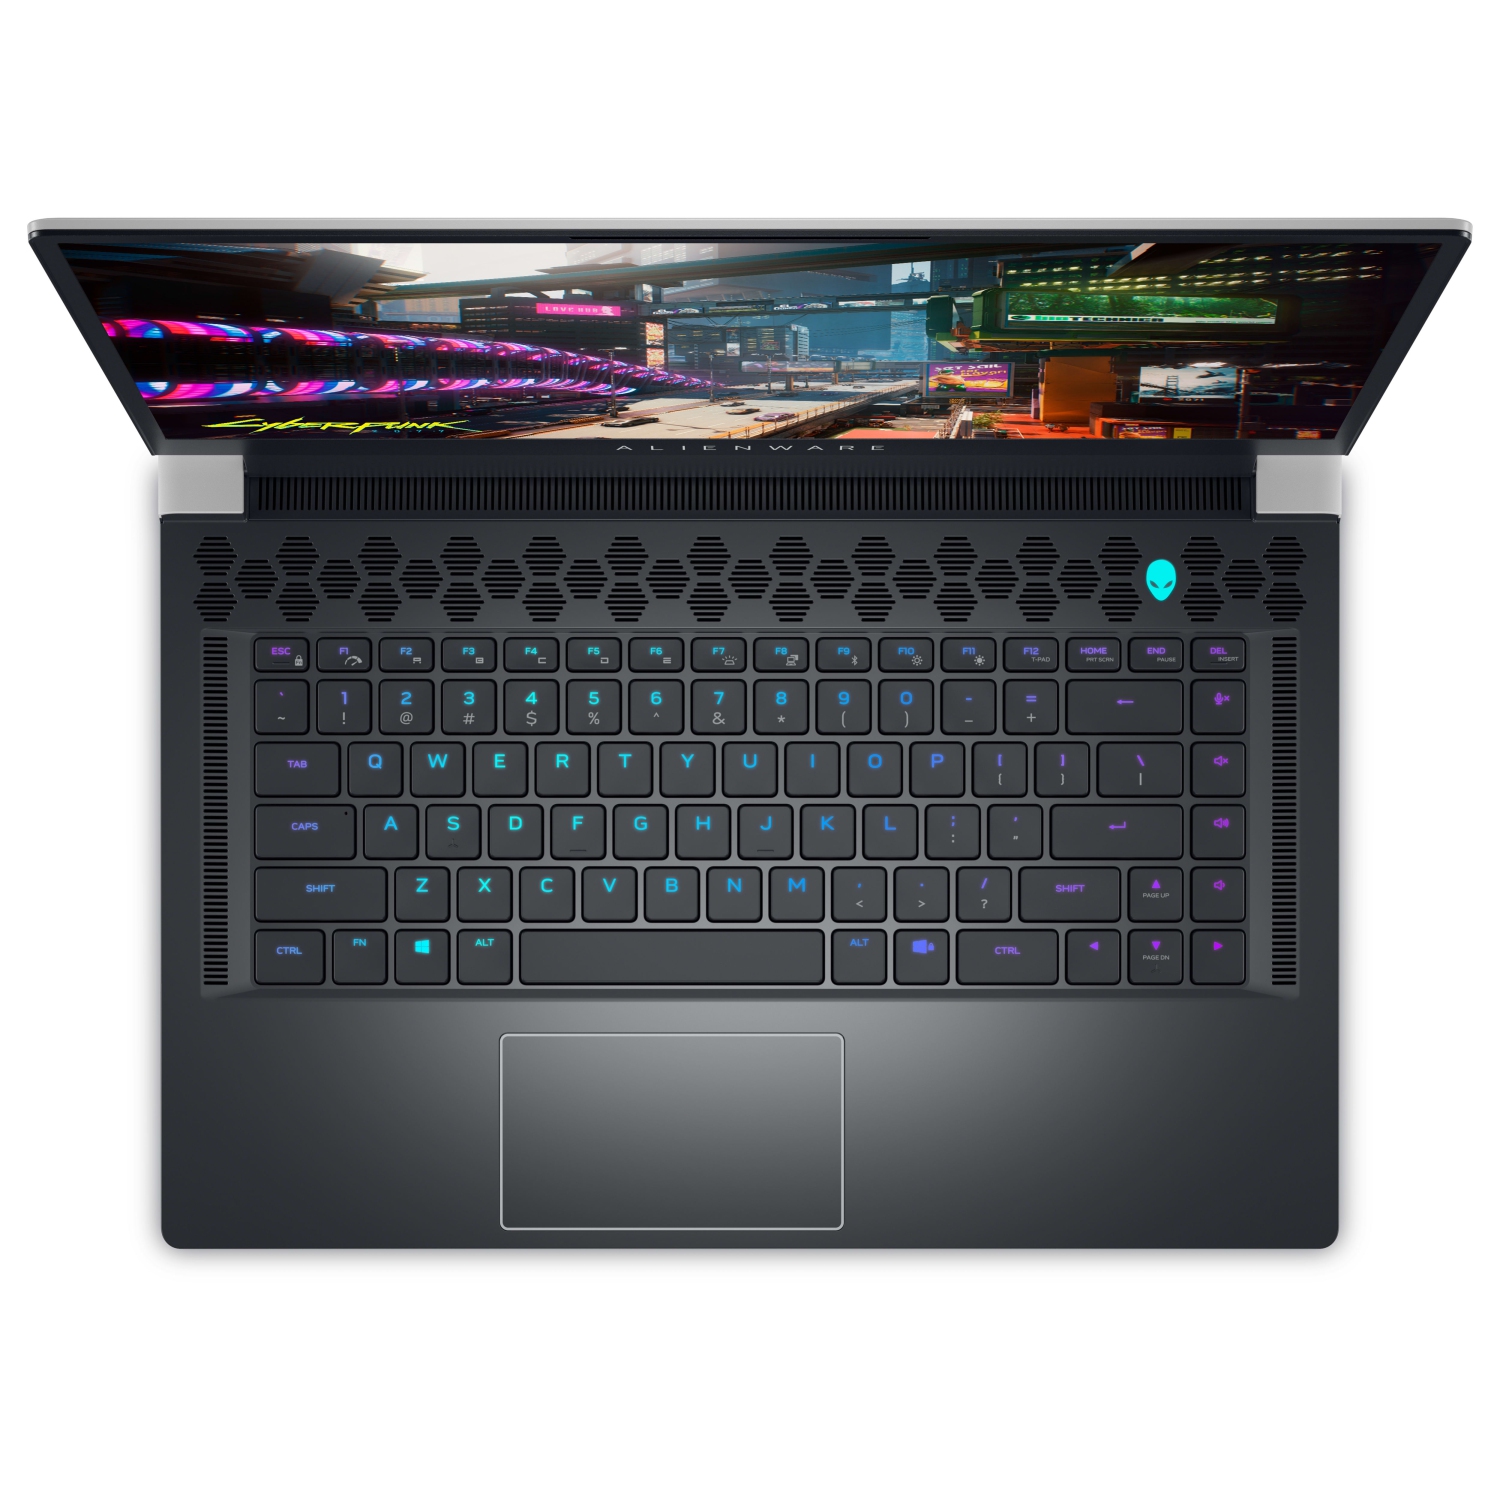 Refurbished (Excellent) – Dell Alienware X15 R2 Gaming Laptop (2022) | 15.6" FHD | Core i9 - 2TB SSD - 32GB RAM - 3070 Ti | 14 Cores @ 5 GHz - 12th Gen CPU - 8GB GDDR5